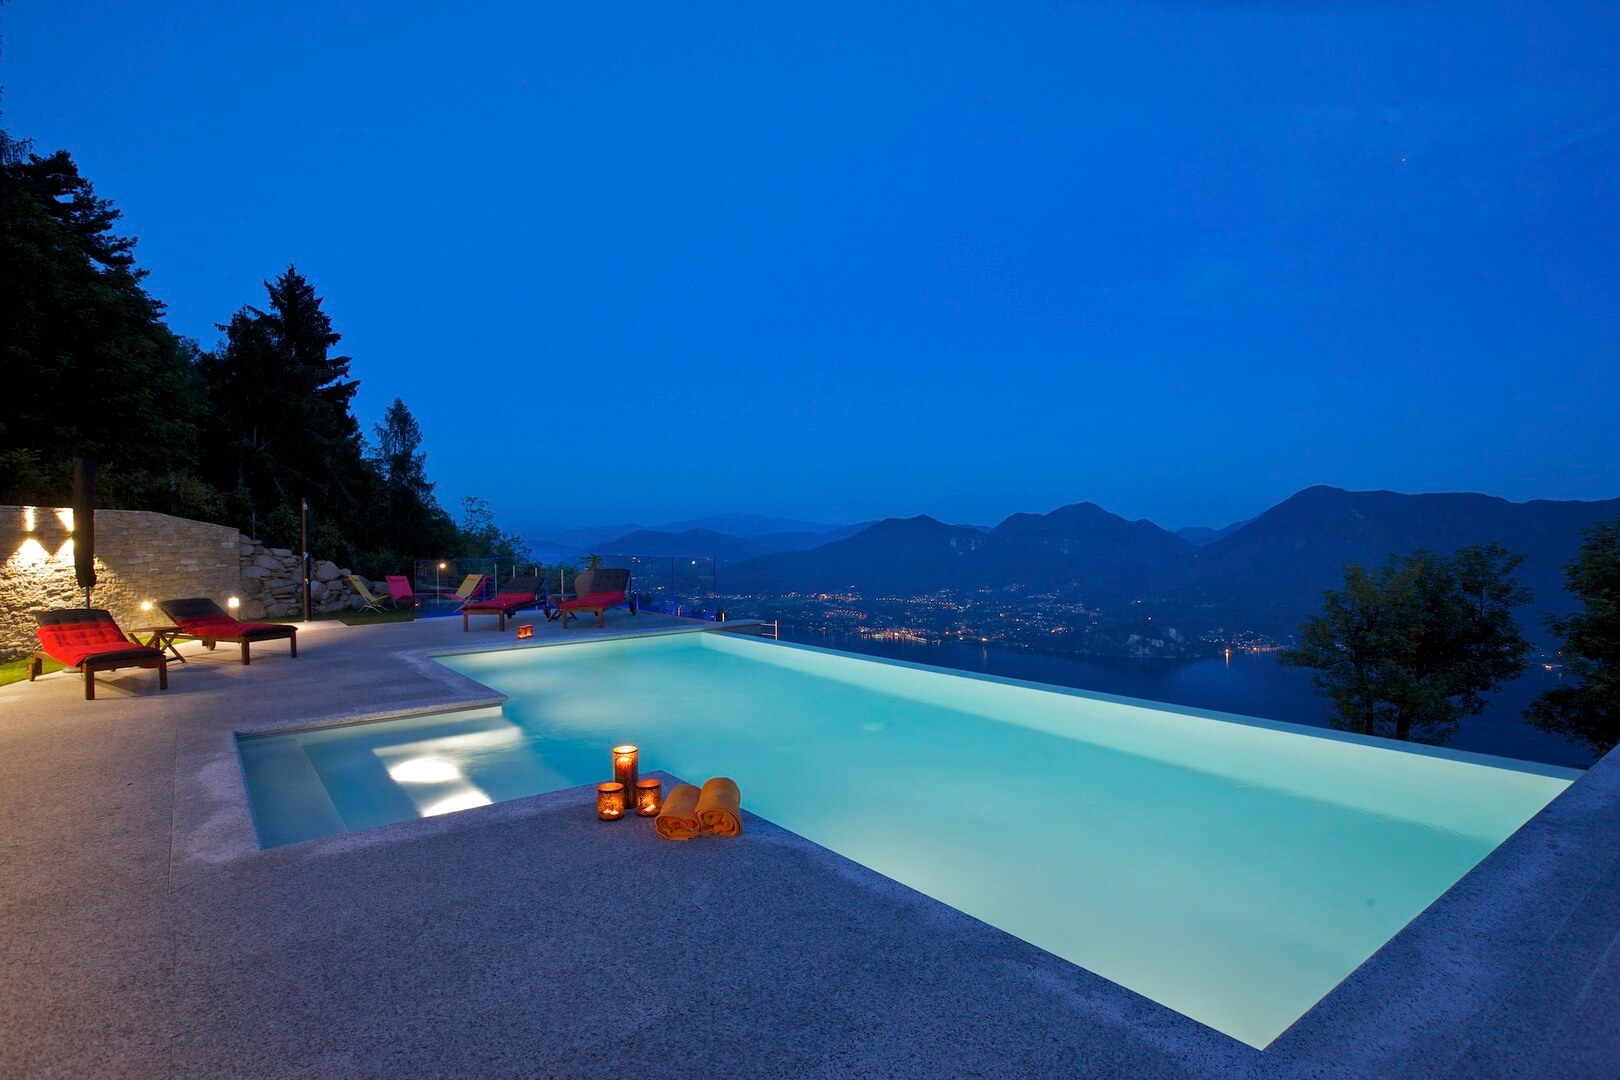 The pool at Villa Confalonieri is out of this world